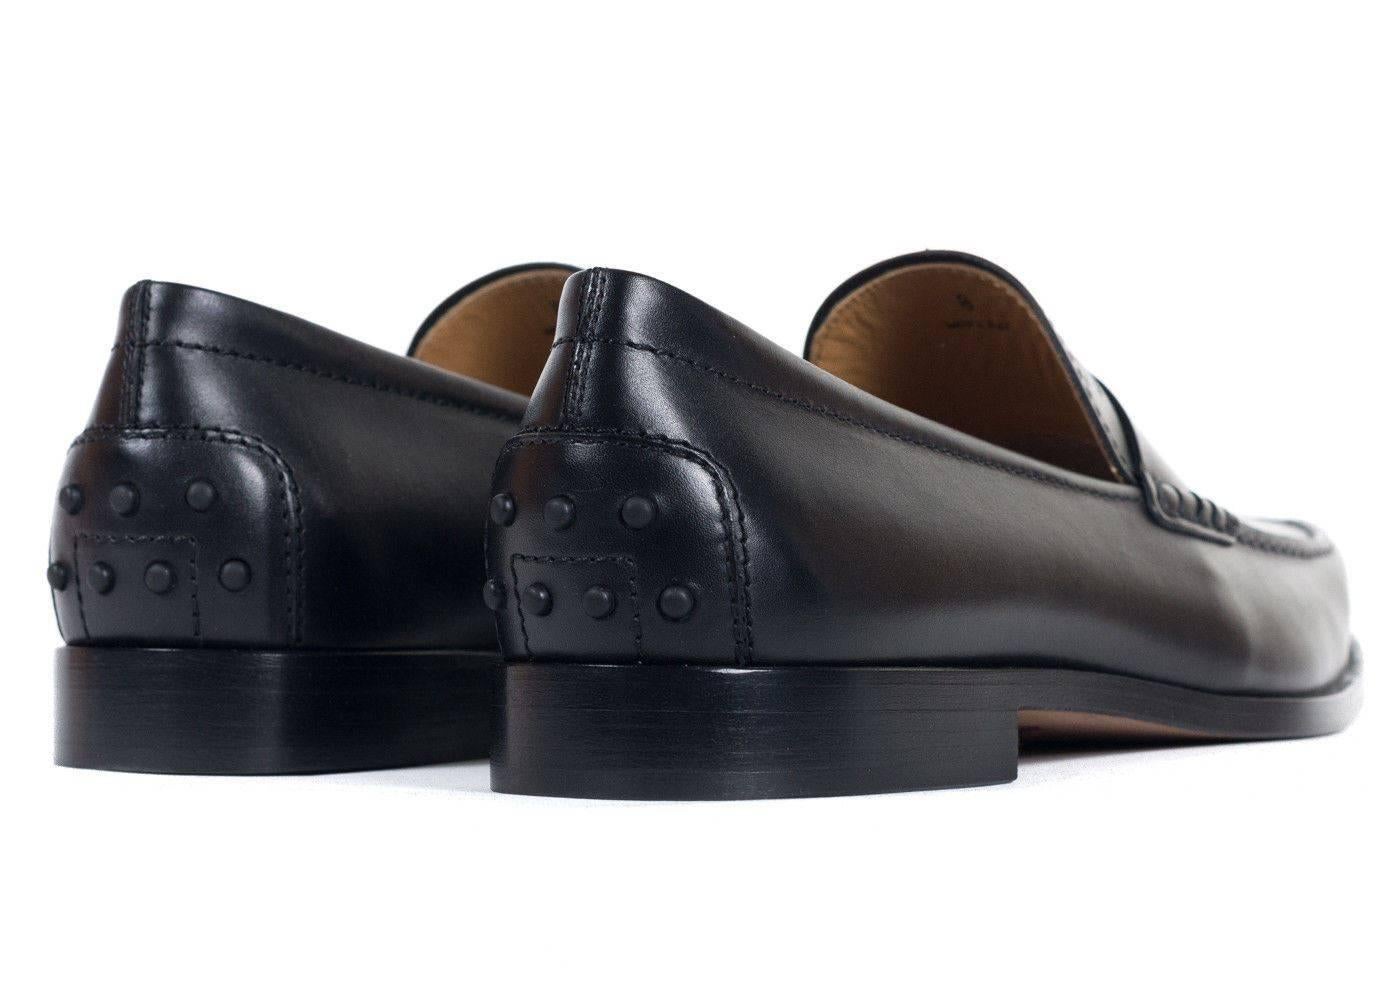 Brand New Tod's Men's Loafers
Original Box & Dust Bag Included
Retails in Stores & Online for $495
Size UK6 / US7 
All Shoes are in UK Sizing
 

Tod's classic penny loafers crafted in black calfskin leather for an ultra smooth look to these shoes.